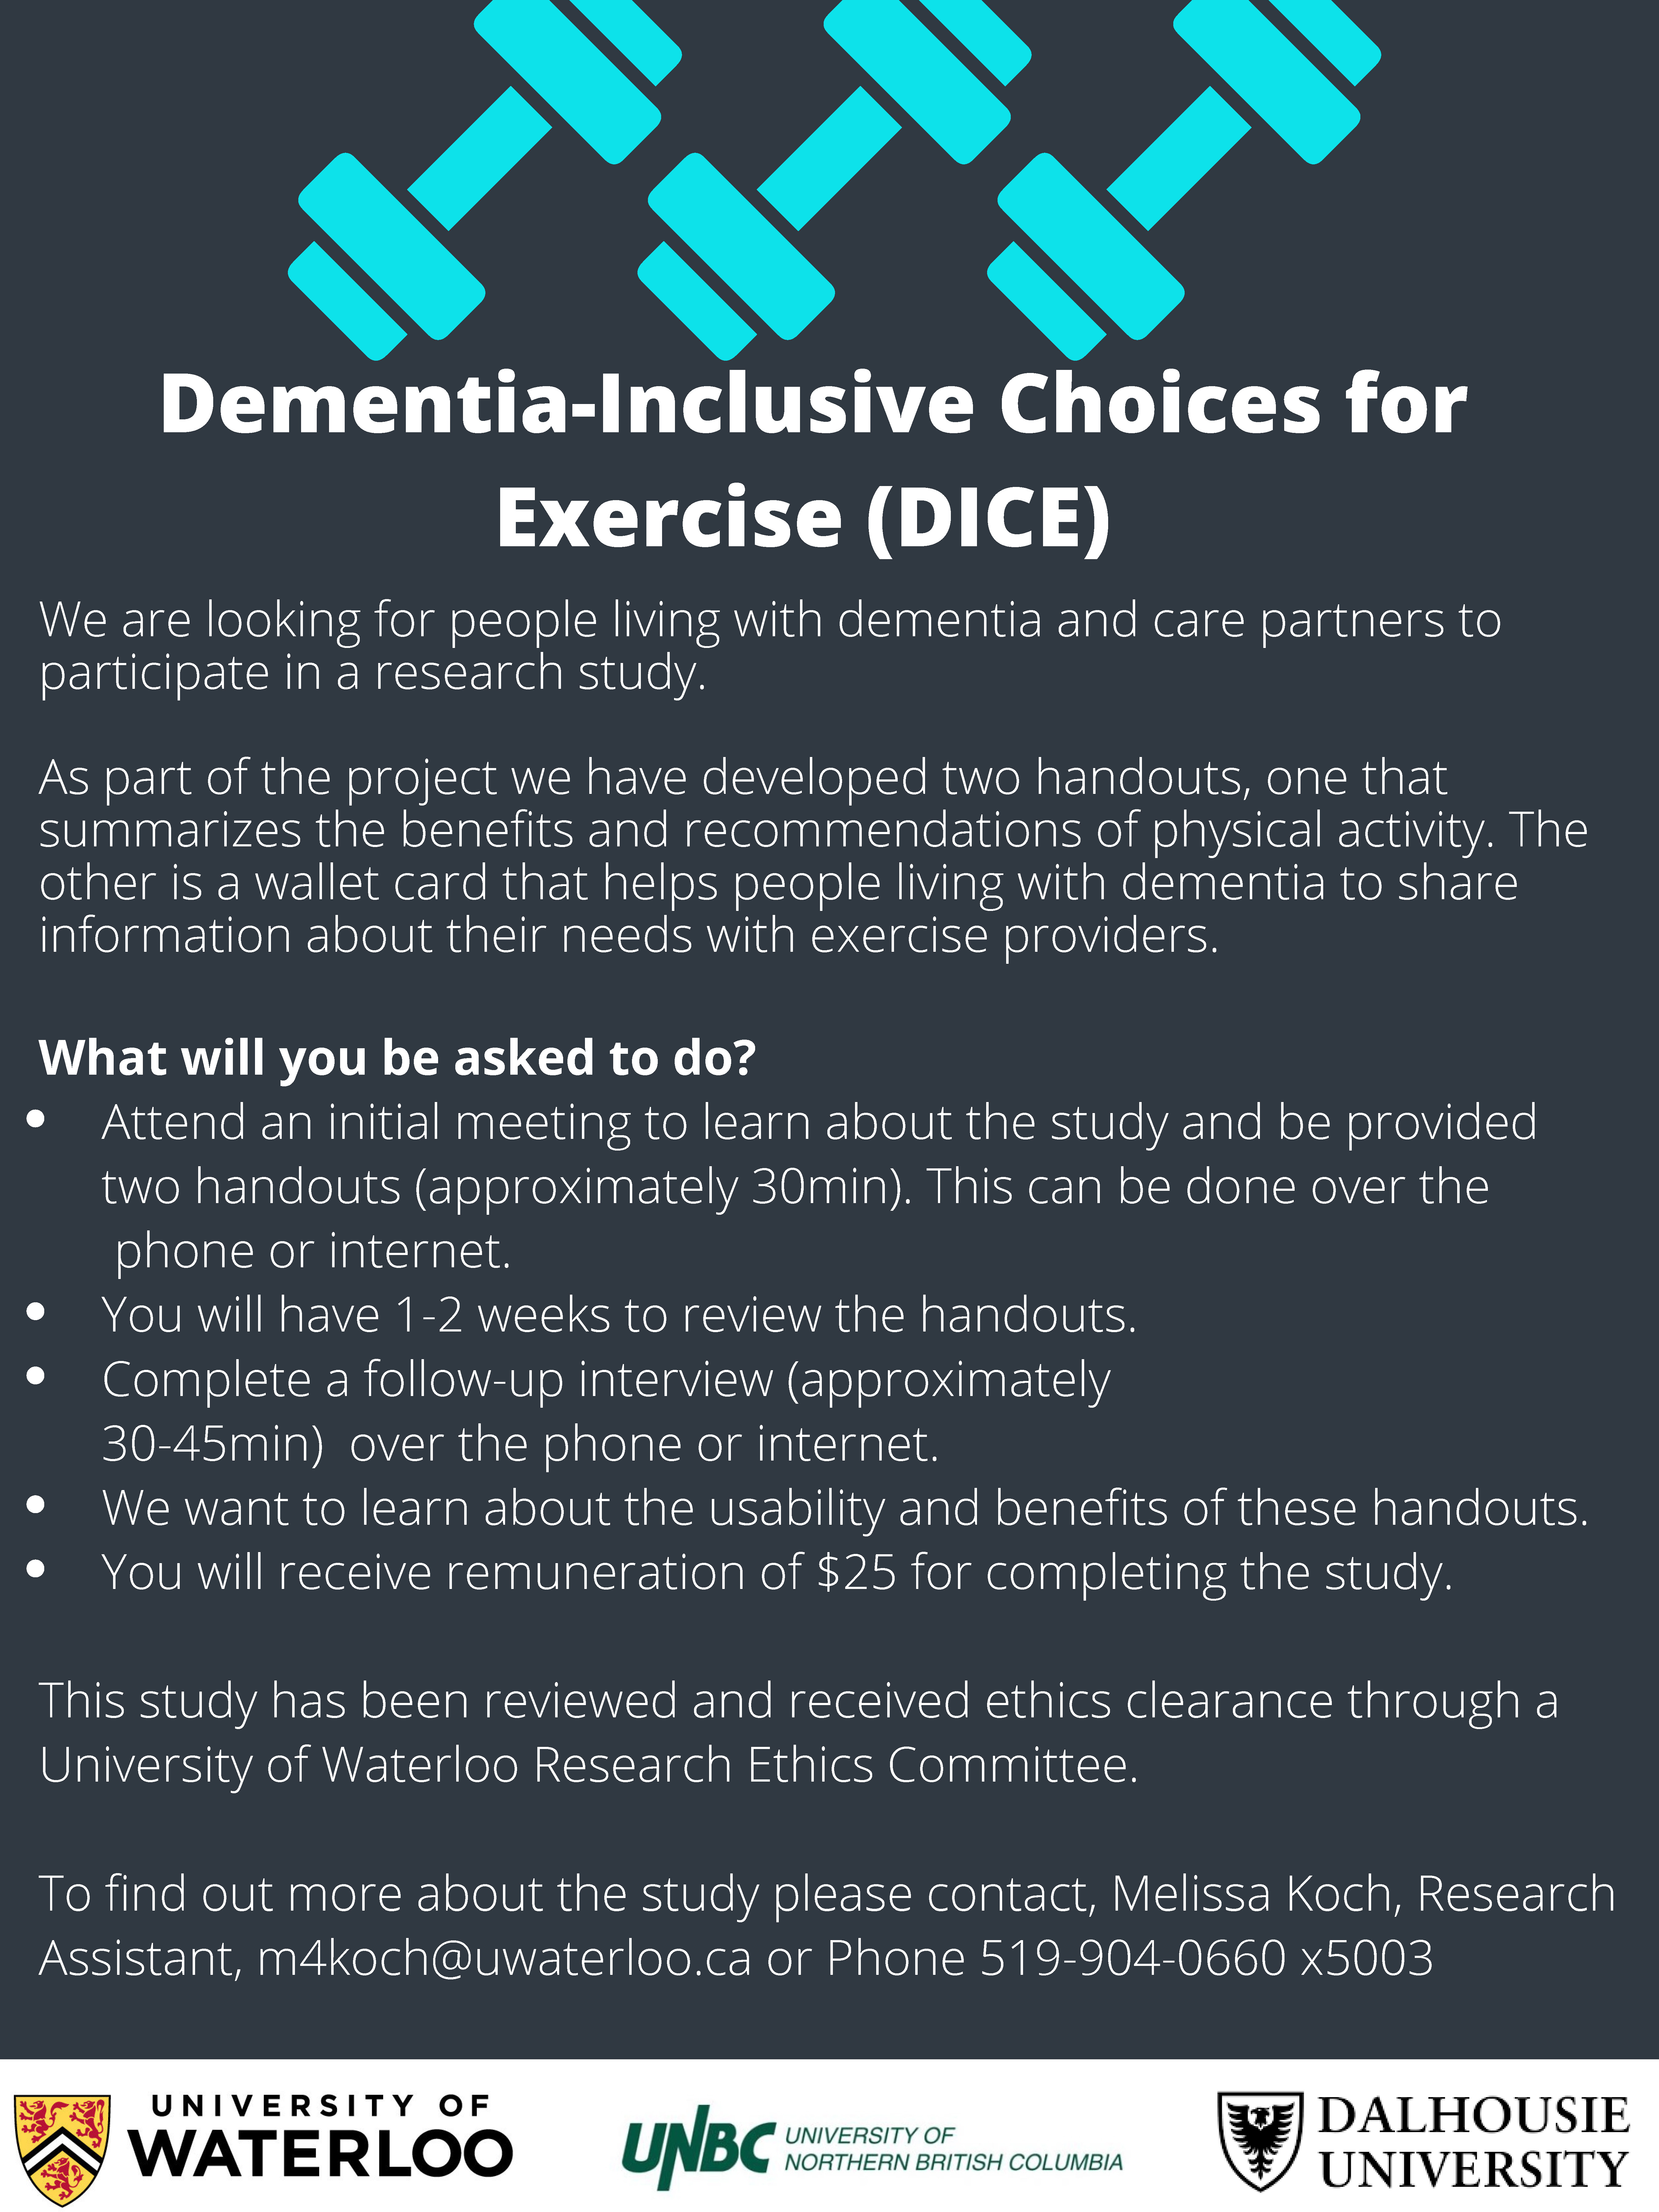 flyer for Dementia-Inclusive Choices for Exercise research study